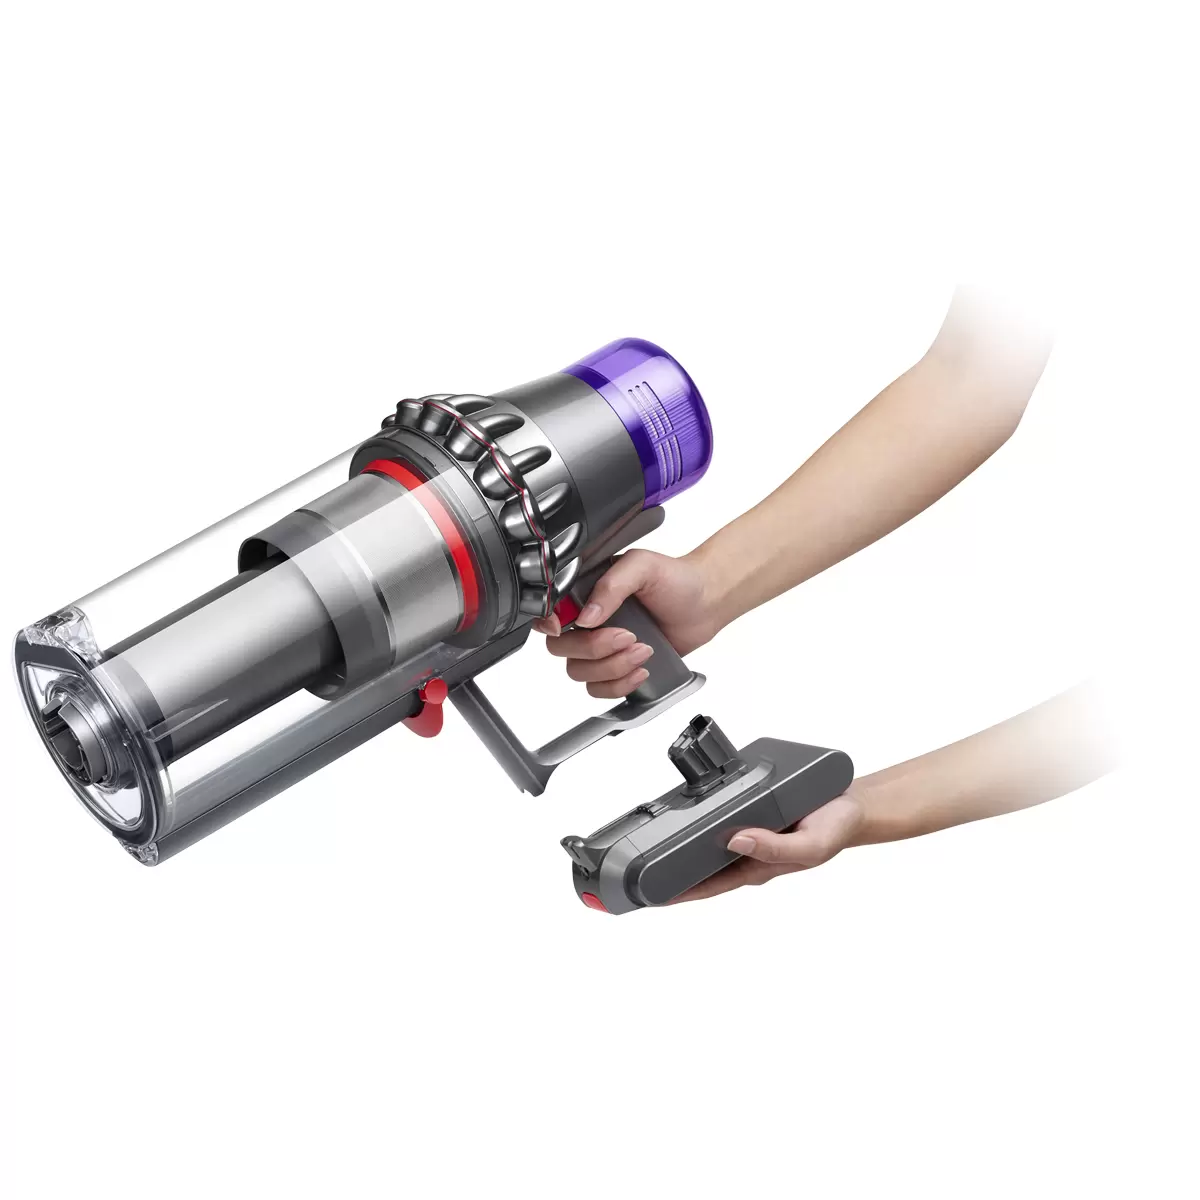 Dyson V11 Outsize Total Clean Stick Vacuum Cleaner 371093-01